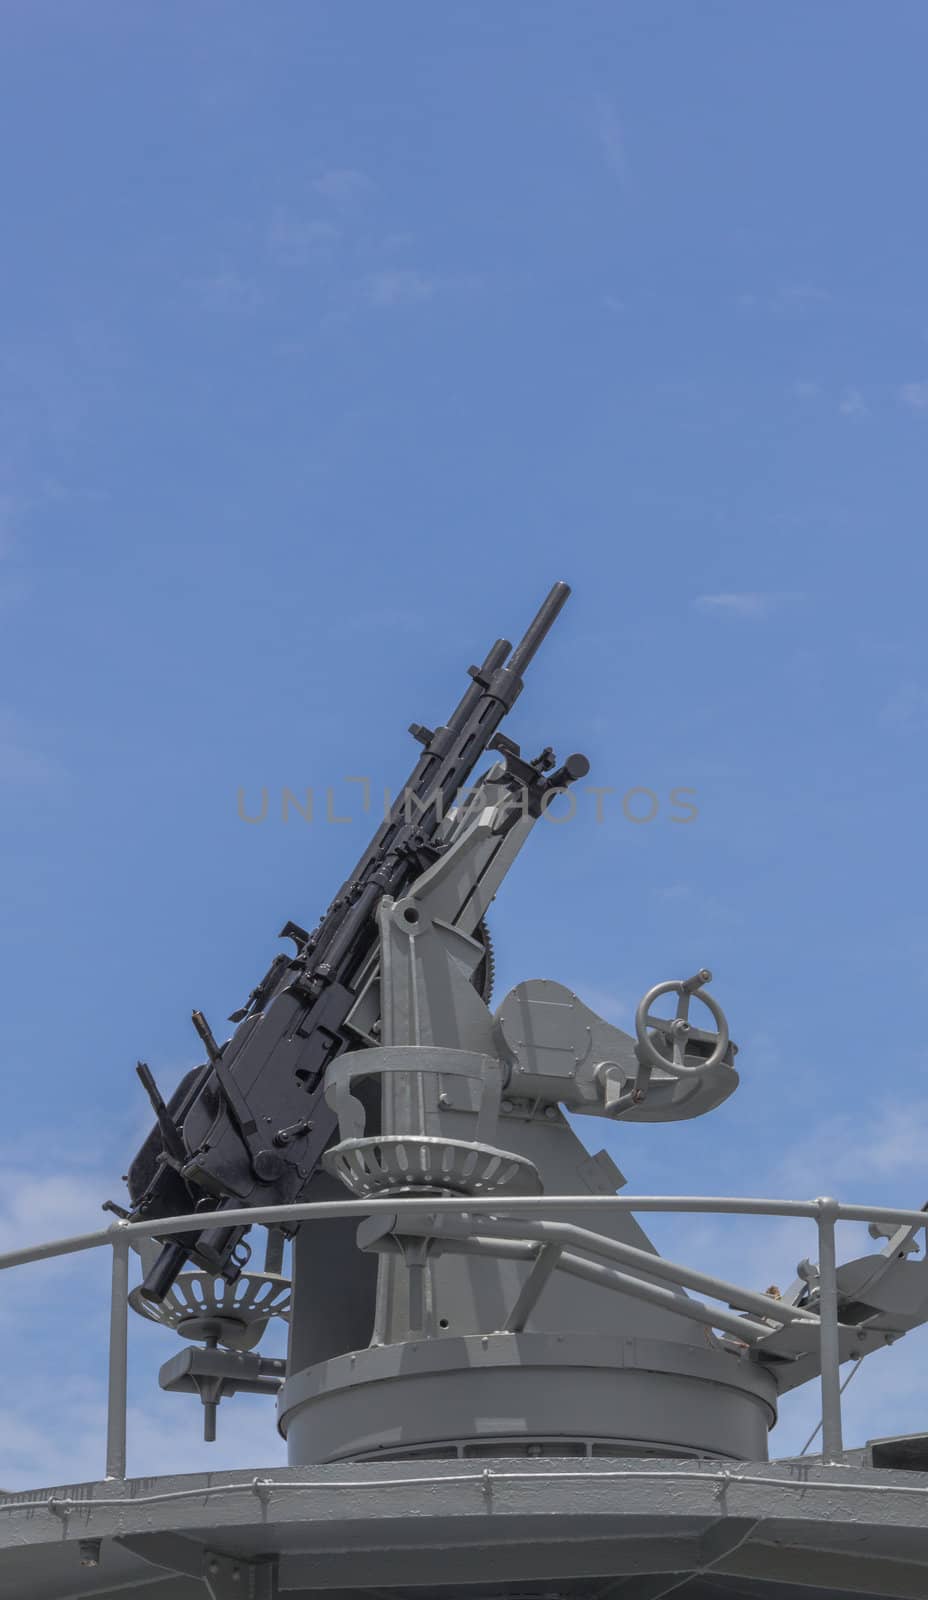 Machine gun on the deck of battleship with the blue sky background